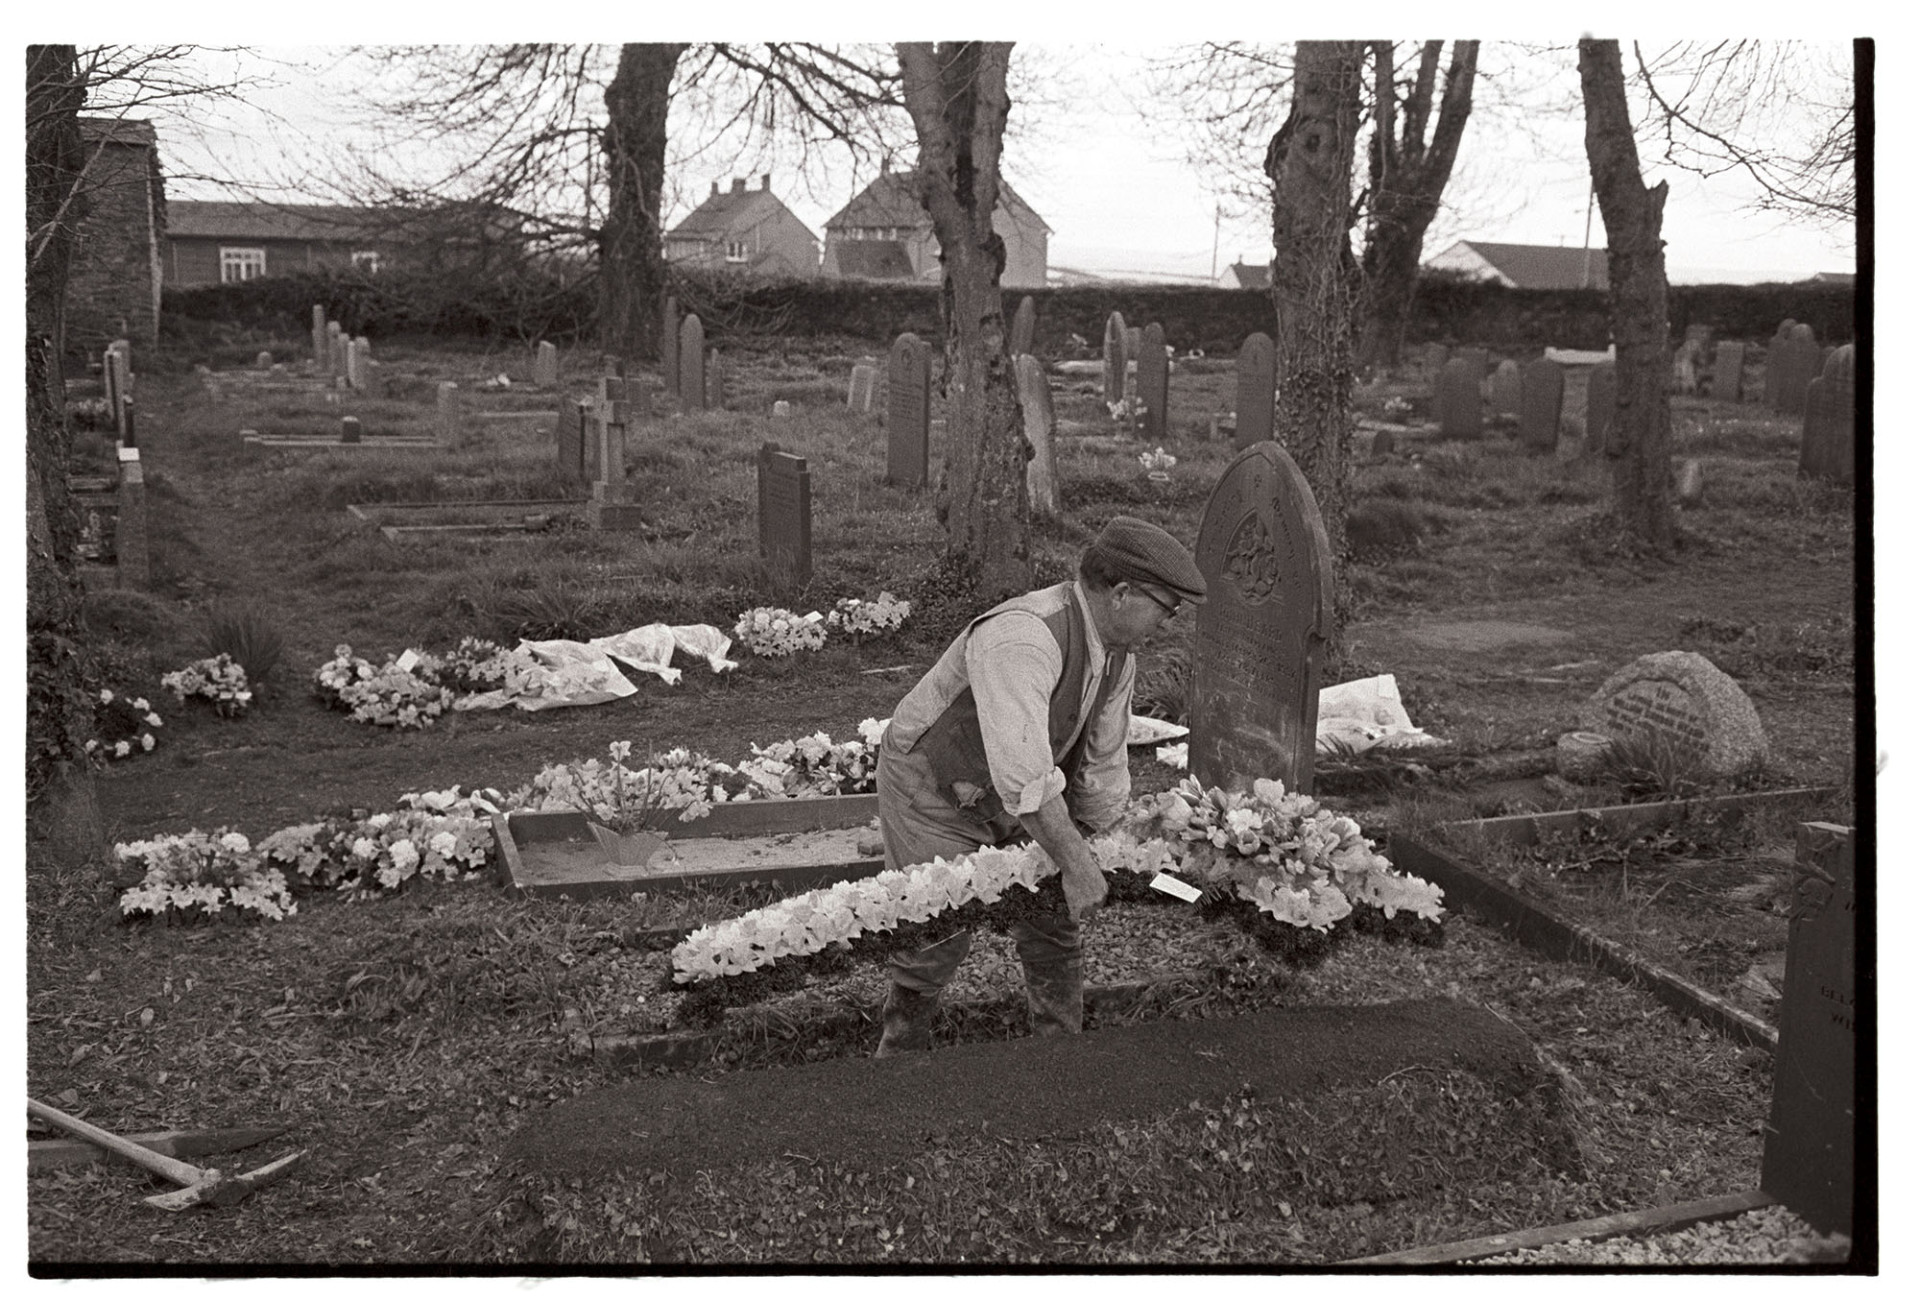 Graveyard with gravedigger tidying up grave after burial. Laying flower cross on grave.
[Gravedigger Reginald Rice laying a large floral cross on a new grave, possibly of Geoff Curtis, which he has just covered in Beaford churchyard.]